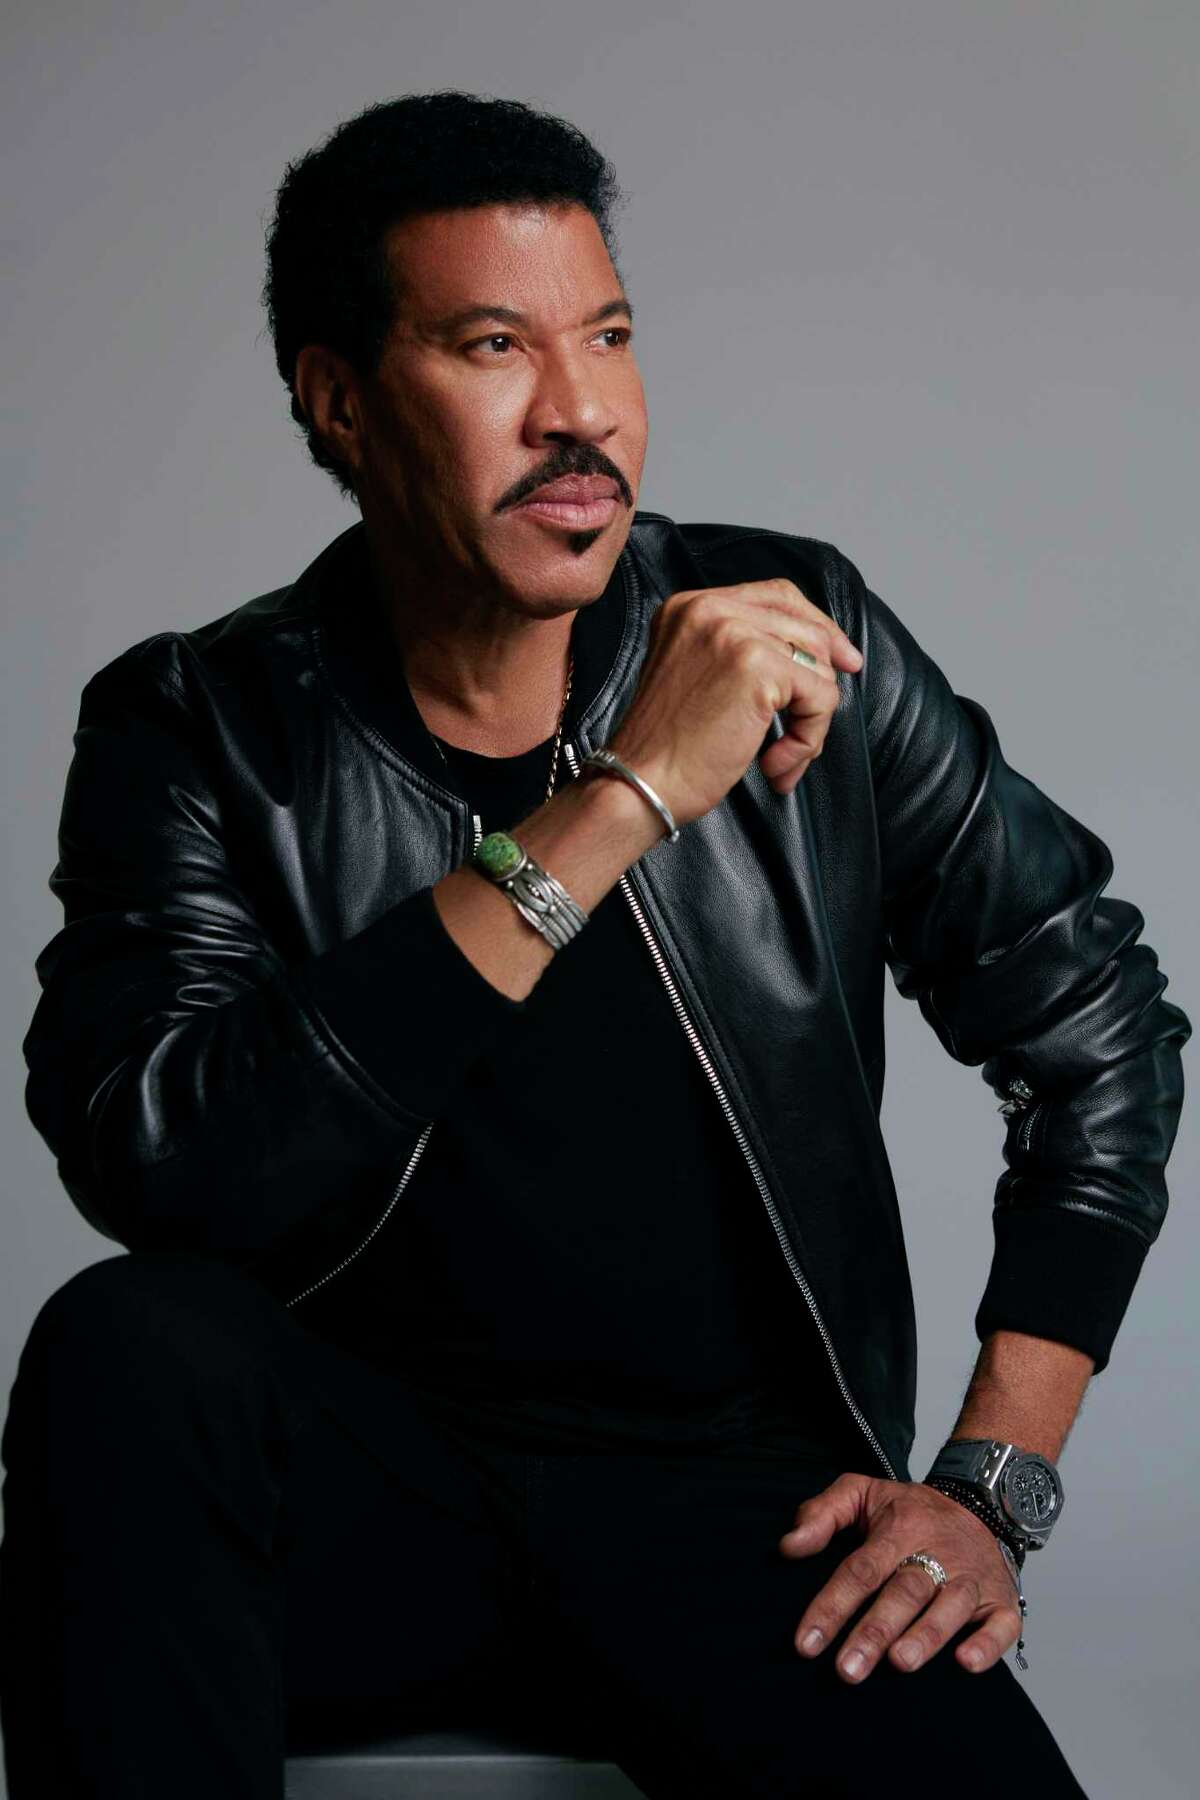 Lionel Richie will perform at Mohegan Sun Arena on July 20.